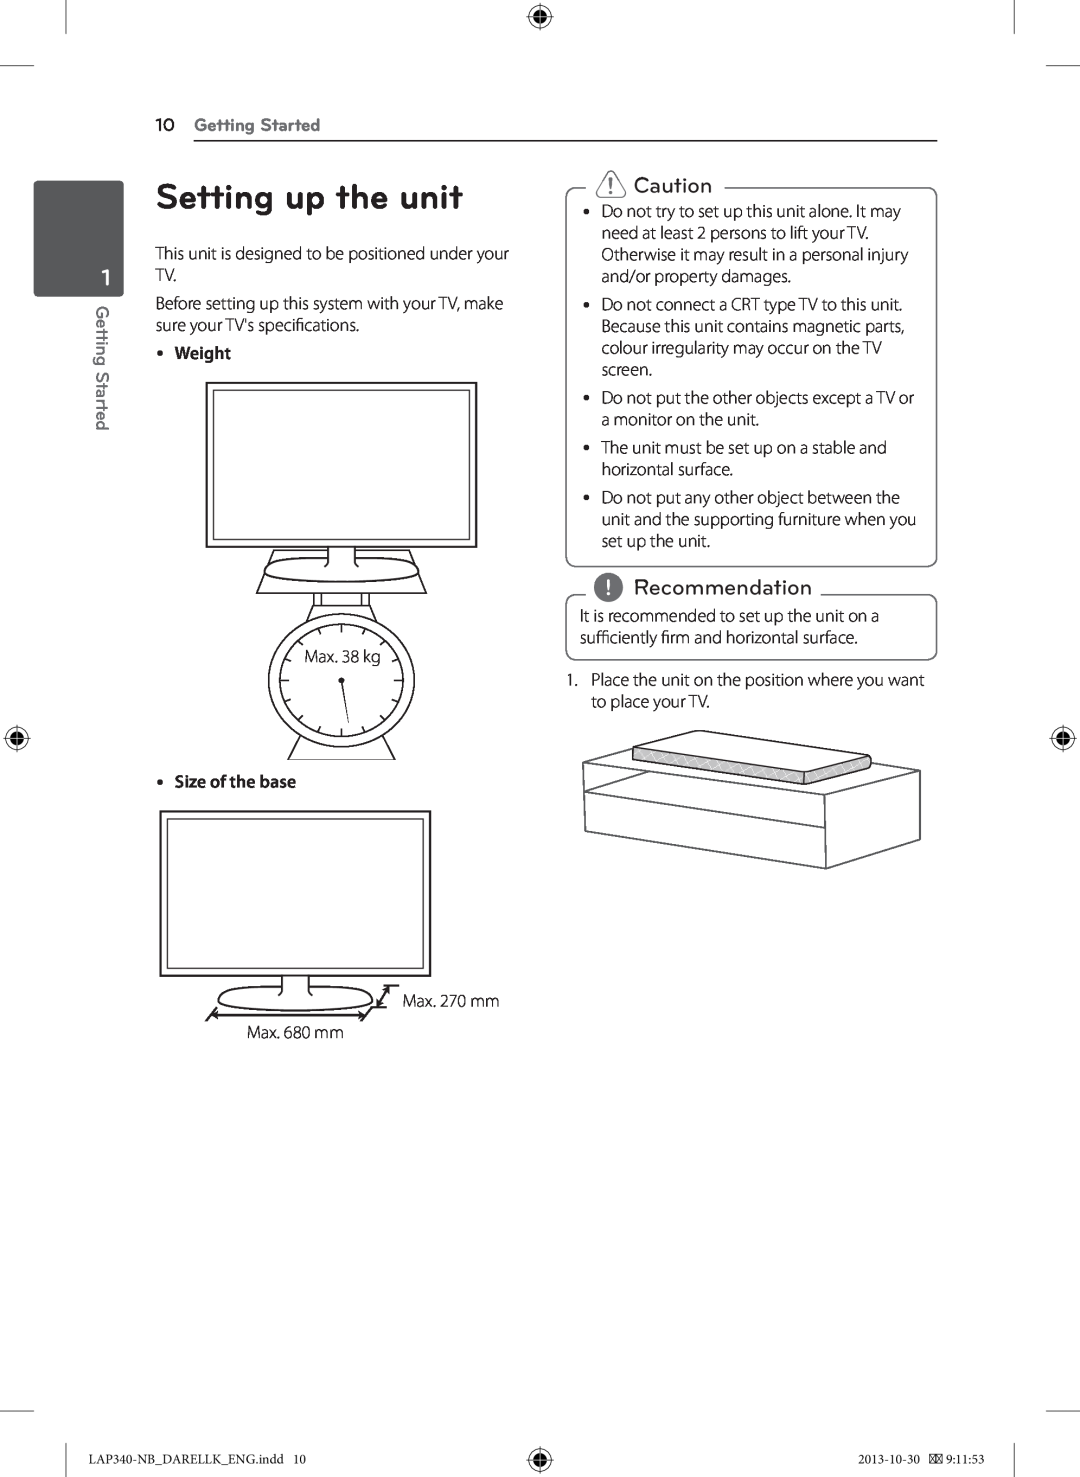 LG Electronics LAP340 owner manual Setting up the unit, Getting Started, yy Weight, yy Size of the base, Recommendation 